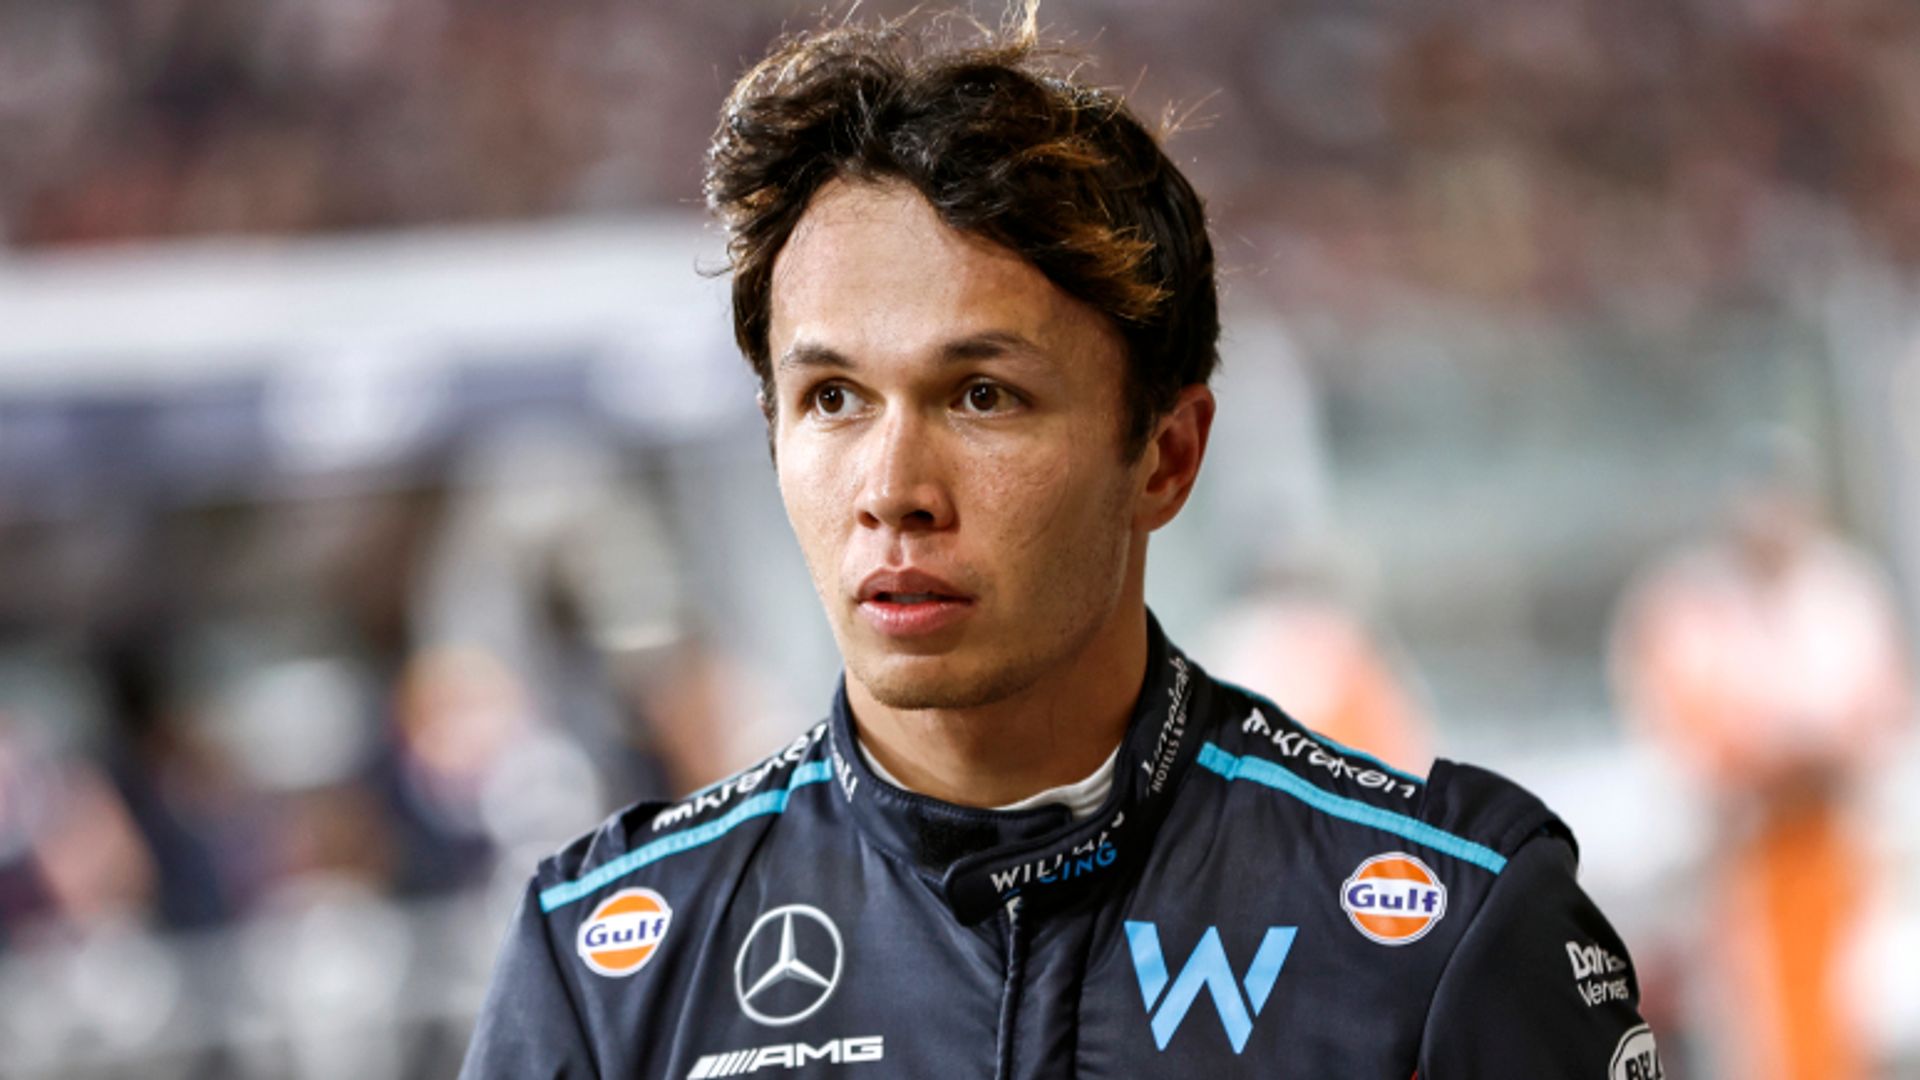 Albon on Mercedes: I need to do more to earn top F1 seat